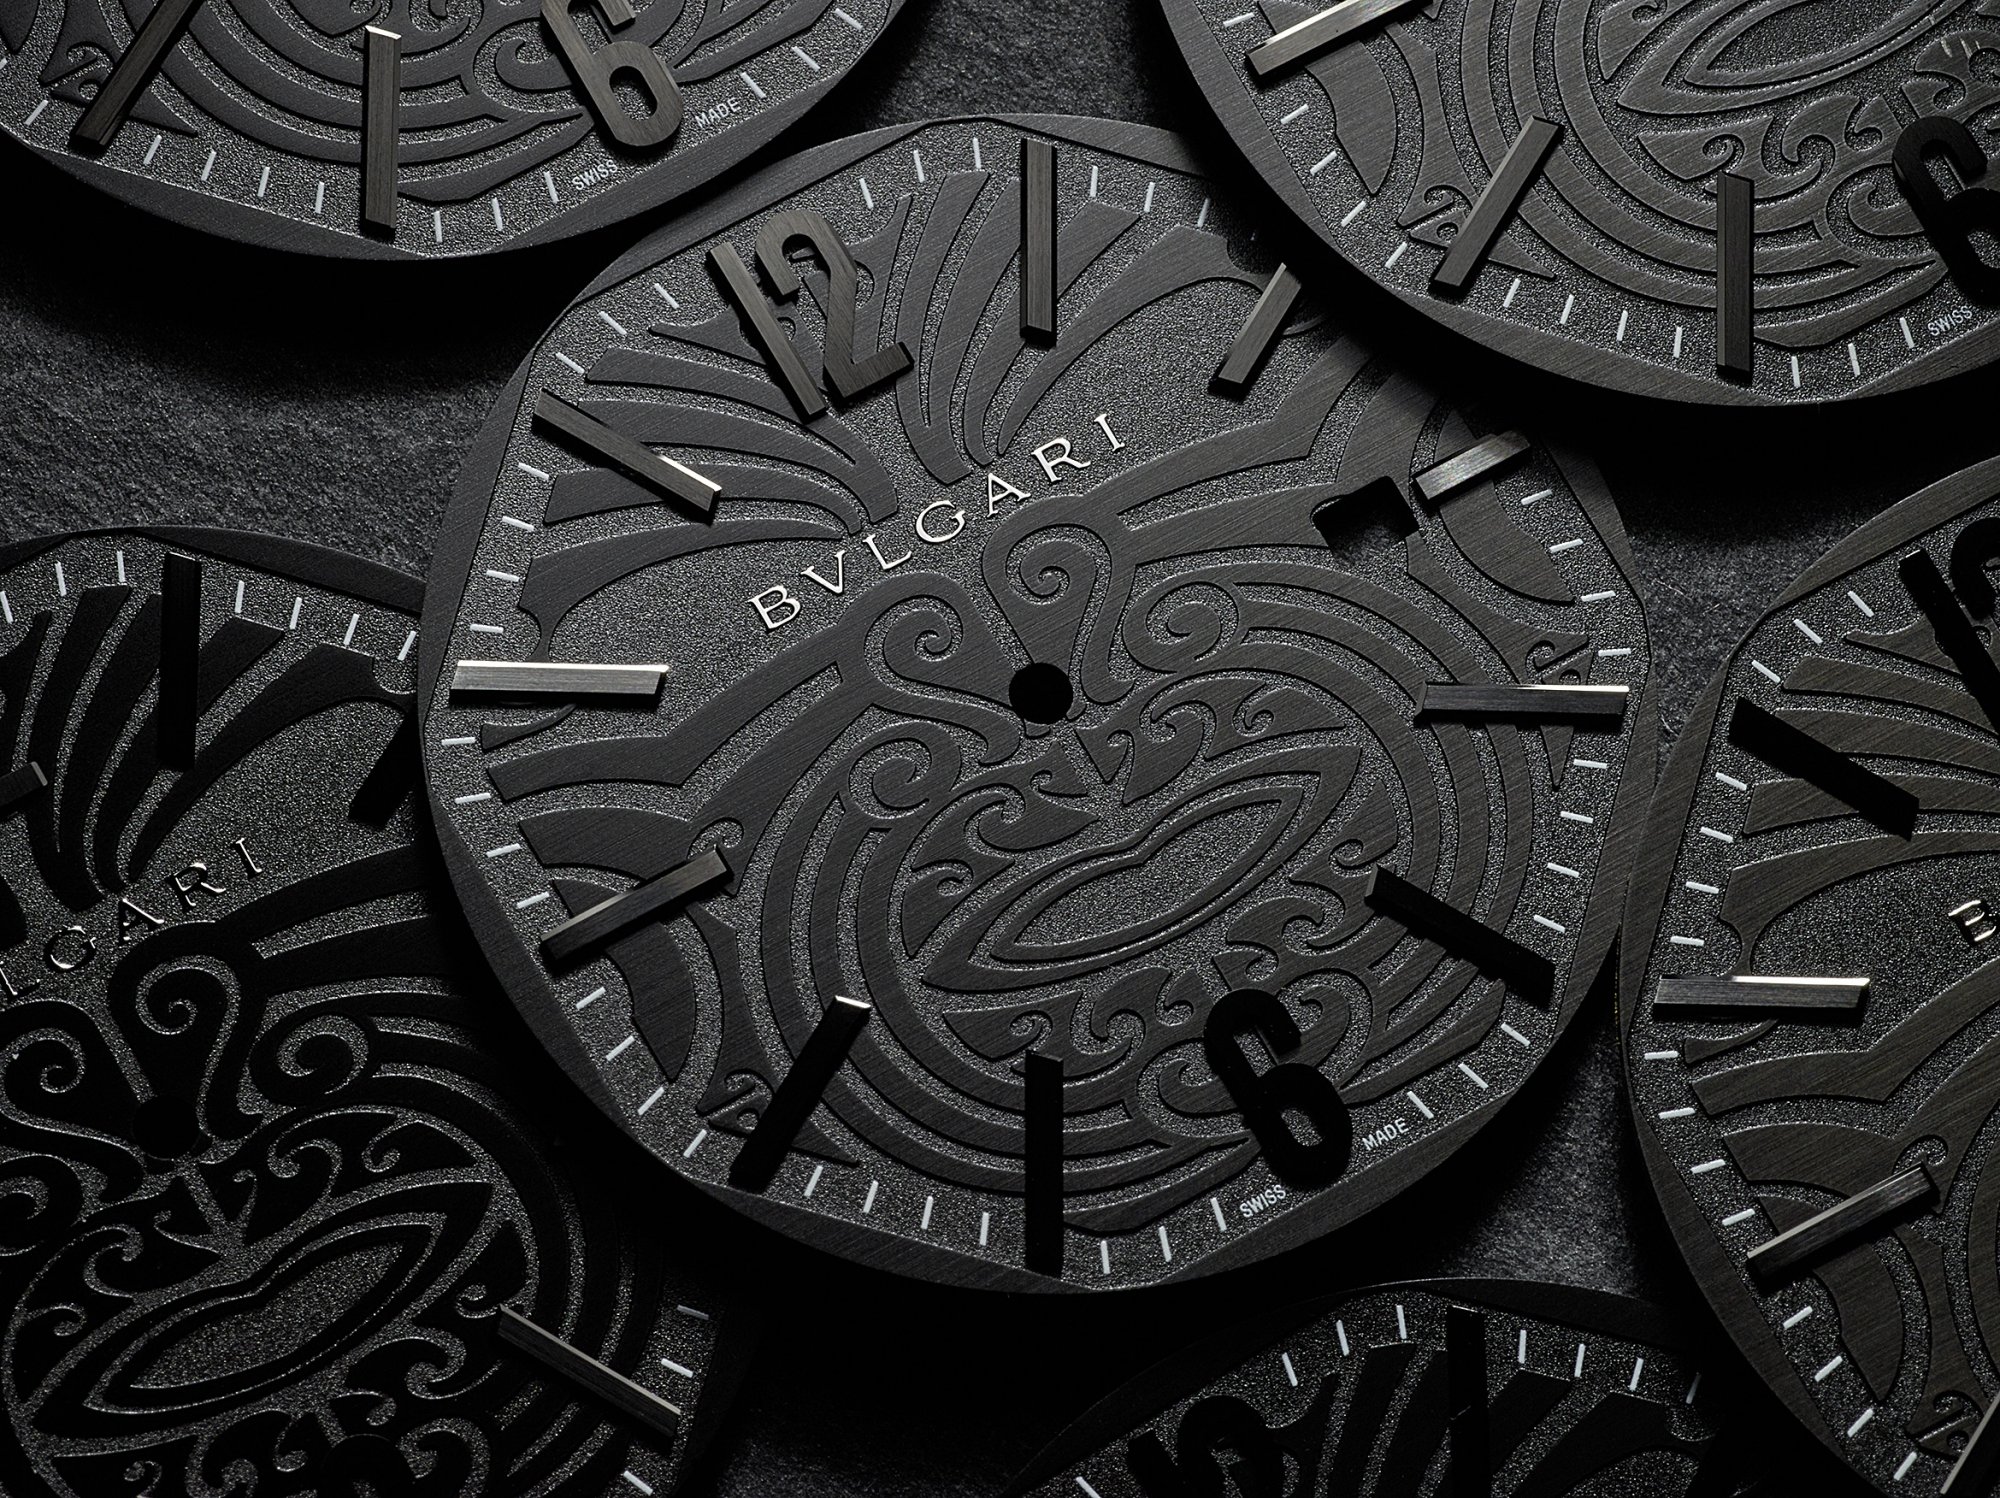 a limited edition WATCH pays tribute to 